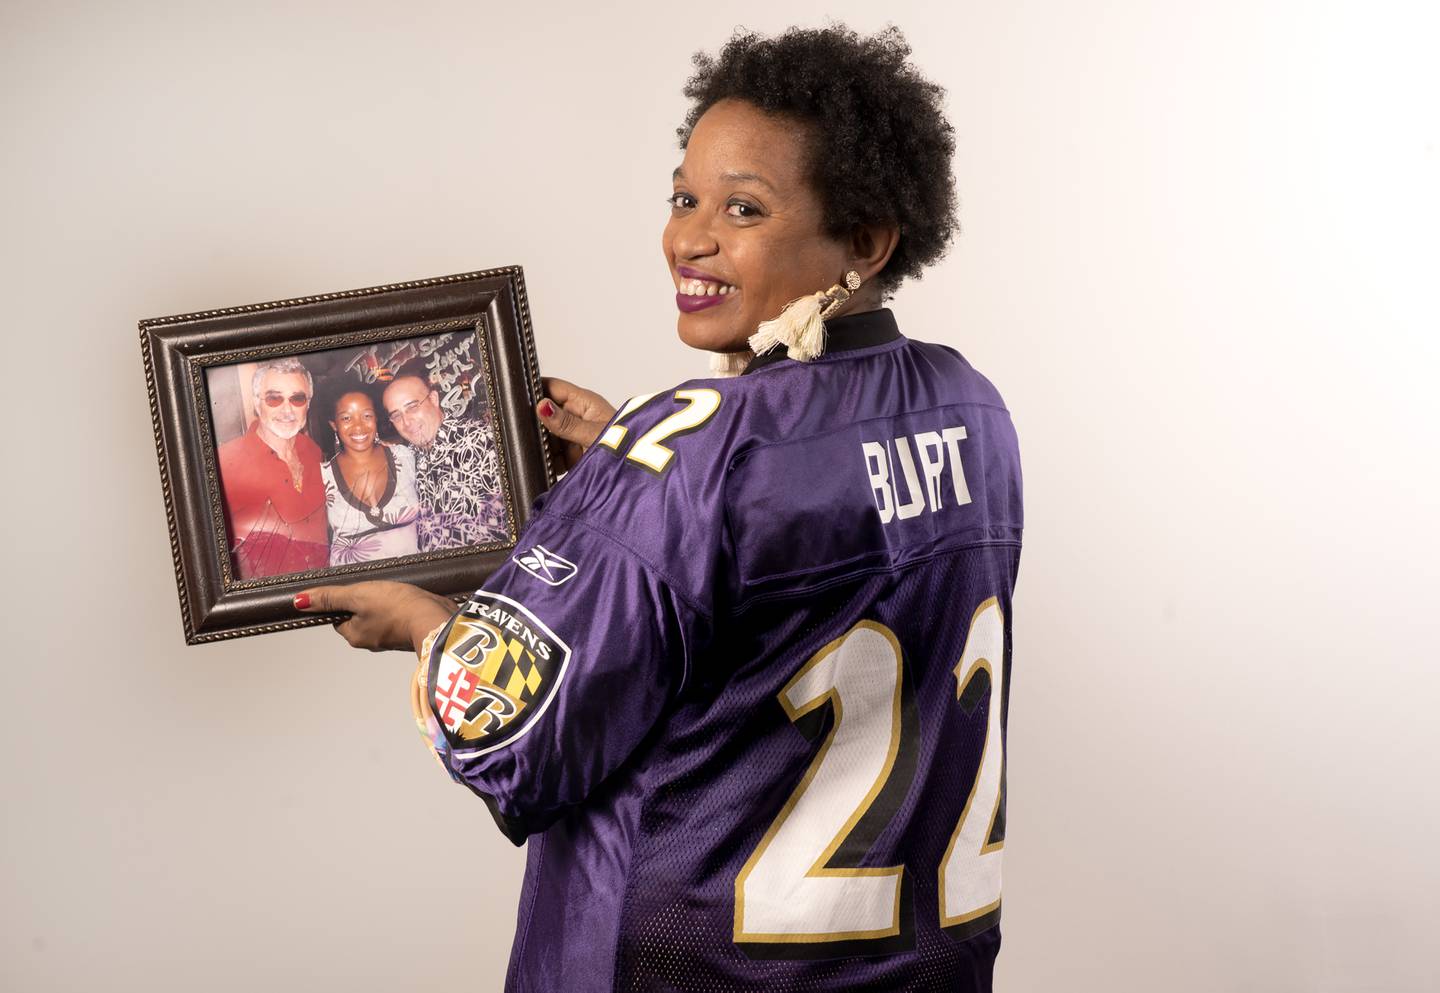 Leslie Streeter wears a jersey given to her by actor Burt Reynolds and holds a photo or (l to r) Burt Reynolds, Leslie Gray Streeter and her husband  Scott Zervitz.